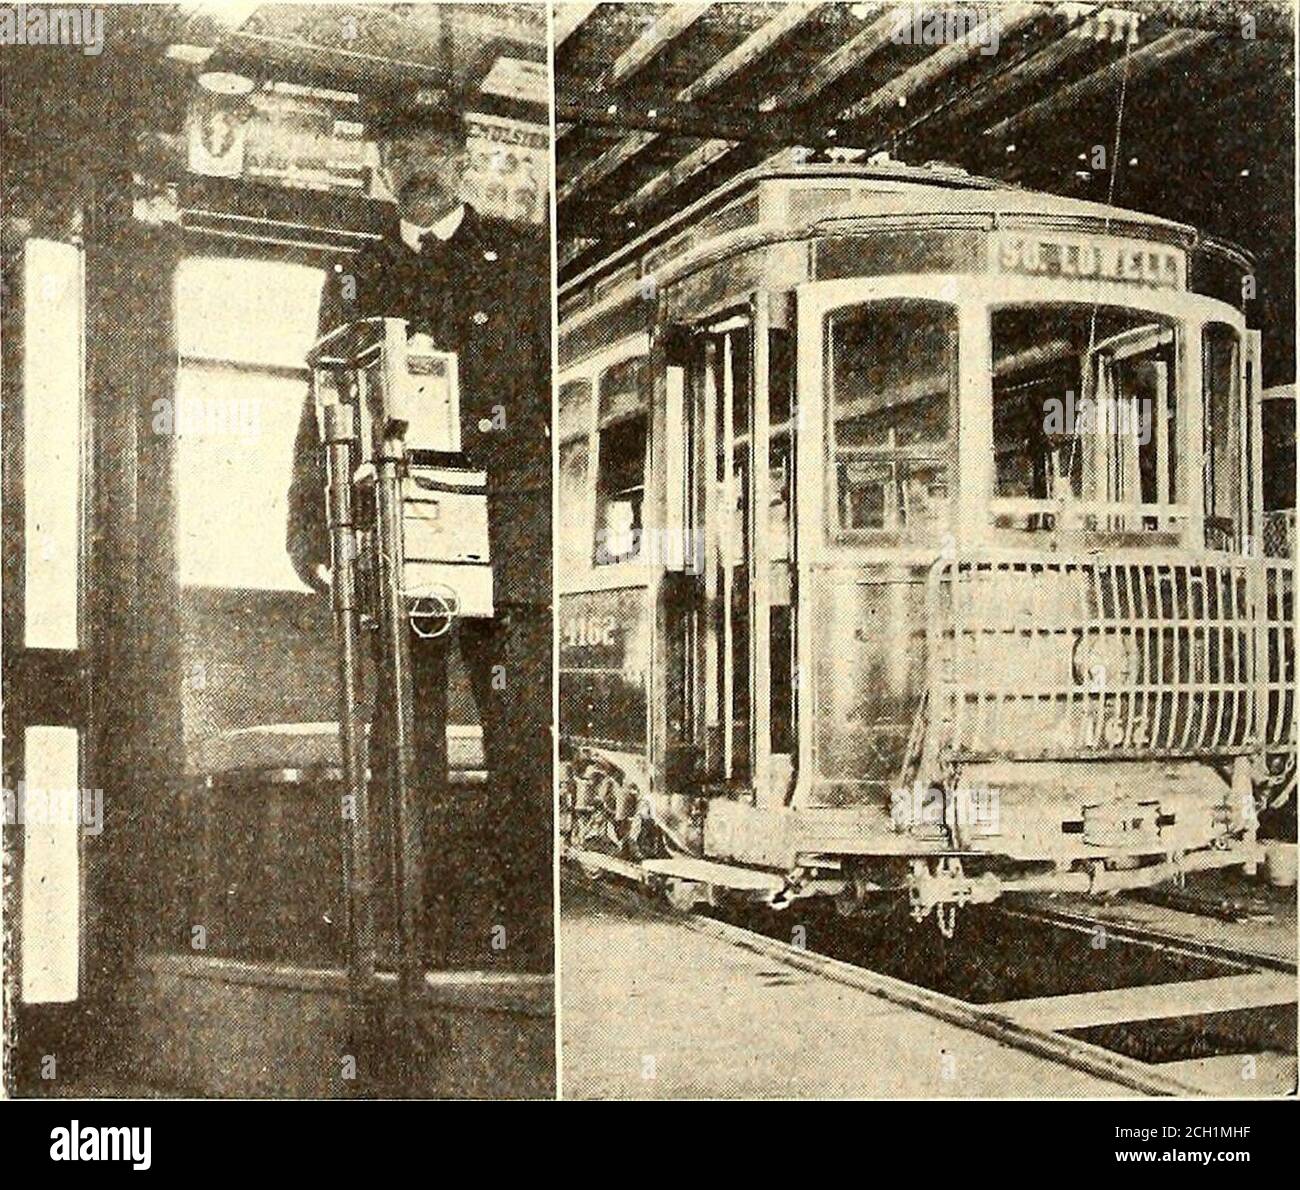 Electric railway journal . DOOR ENGINE MOUNTED IN RECESS ABOVE DOOR much to  the passengers convenience in entering andleaving the car. At the  conductors station beside the fare box aretwo valves